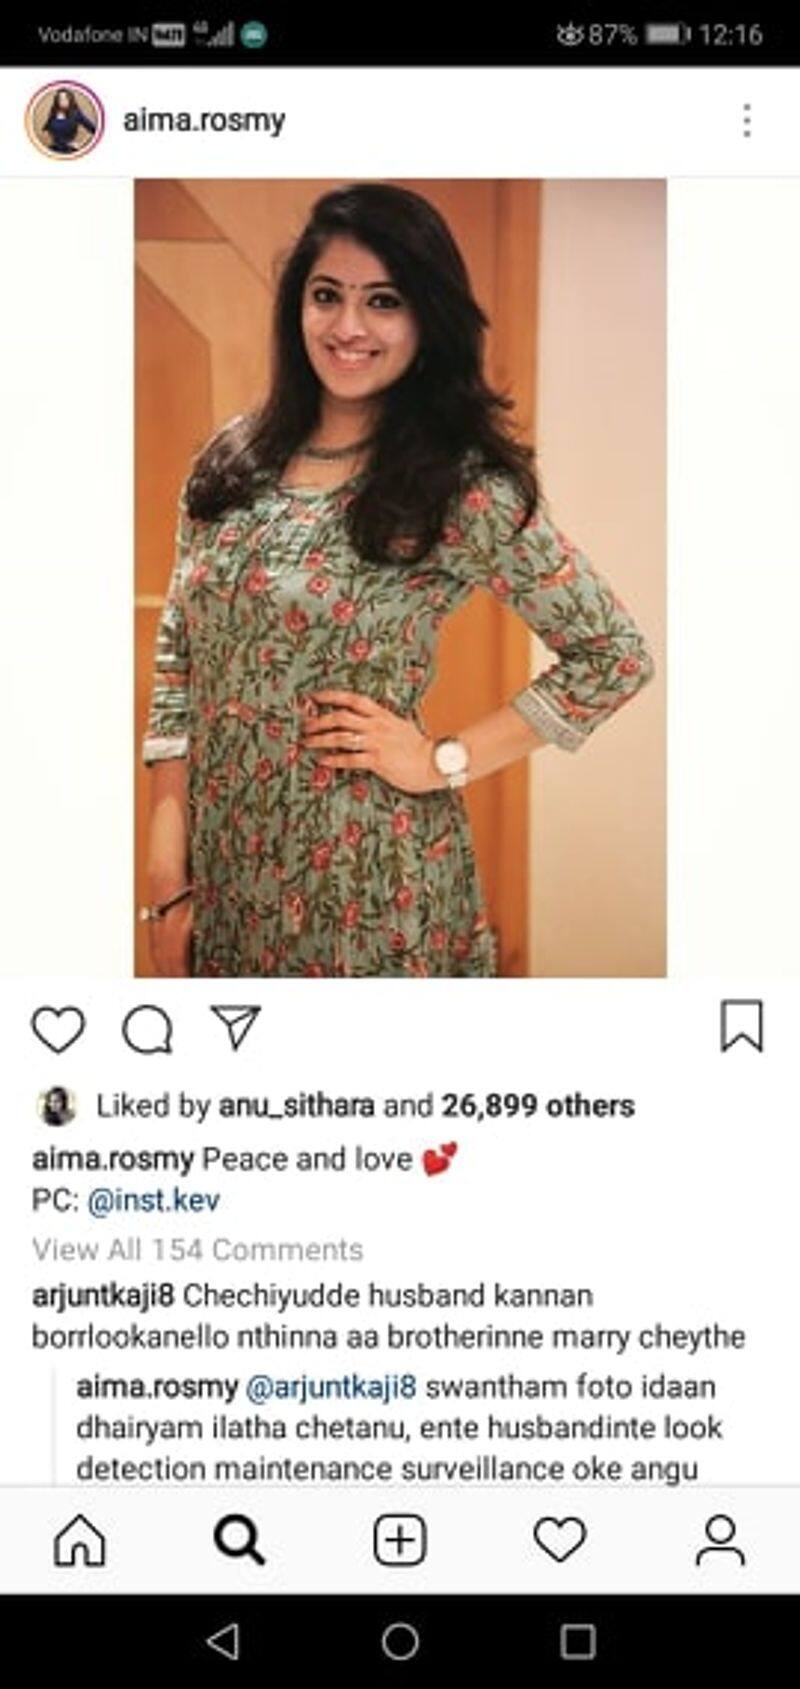 aima rosmy sebastian mass reply to bad comments